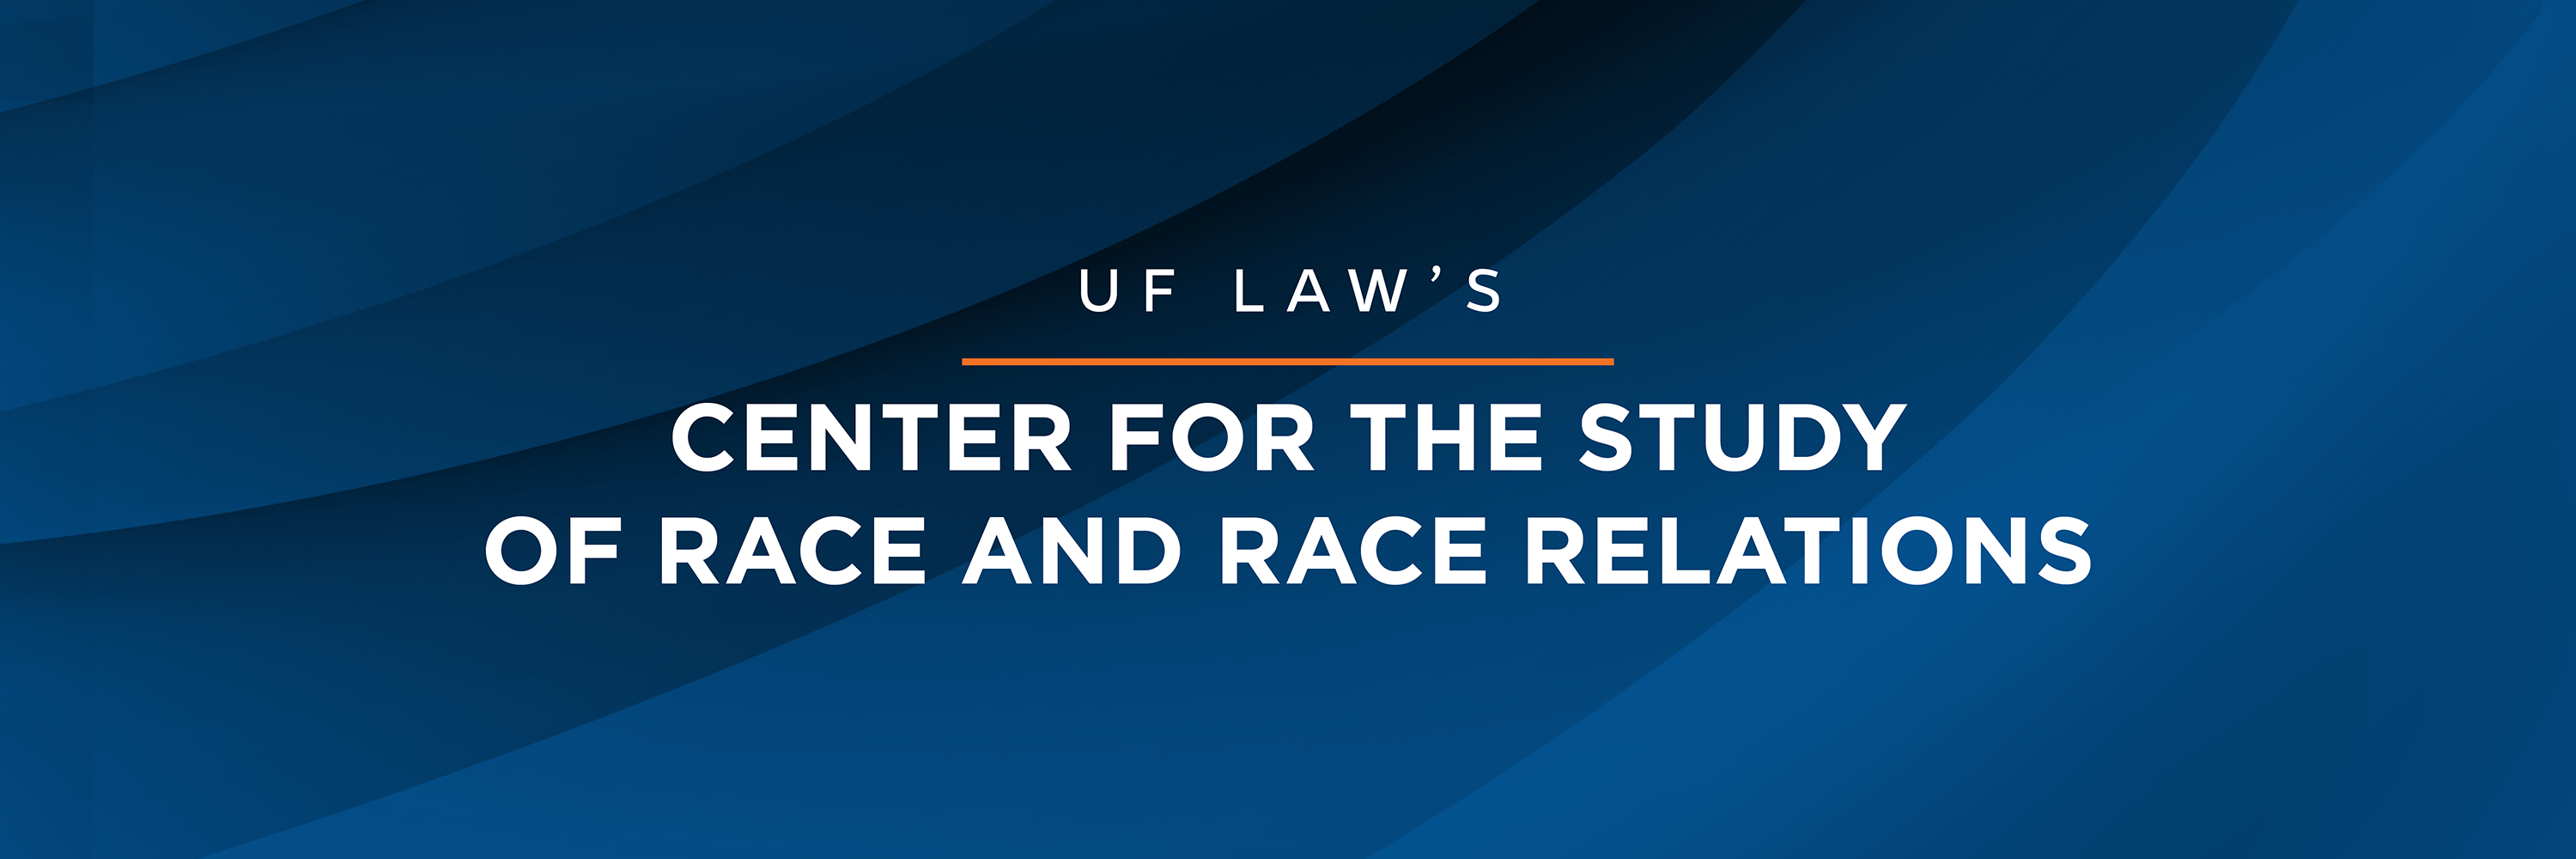 Center for the Study of Race and Race Relations